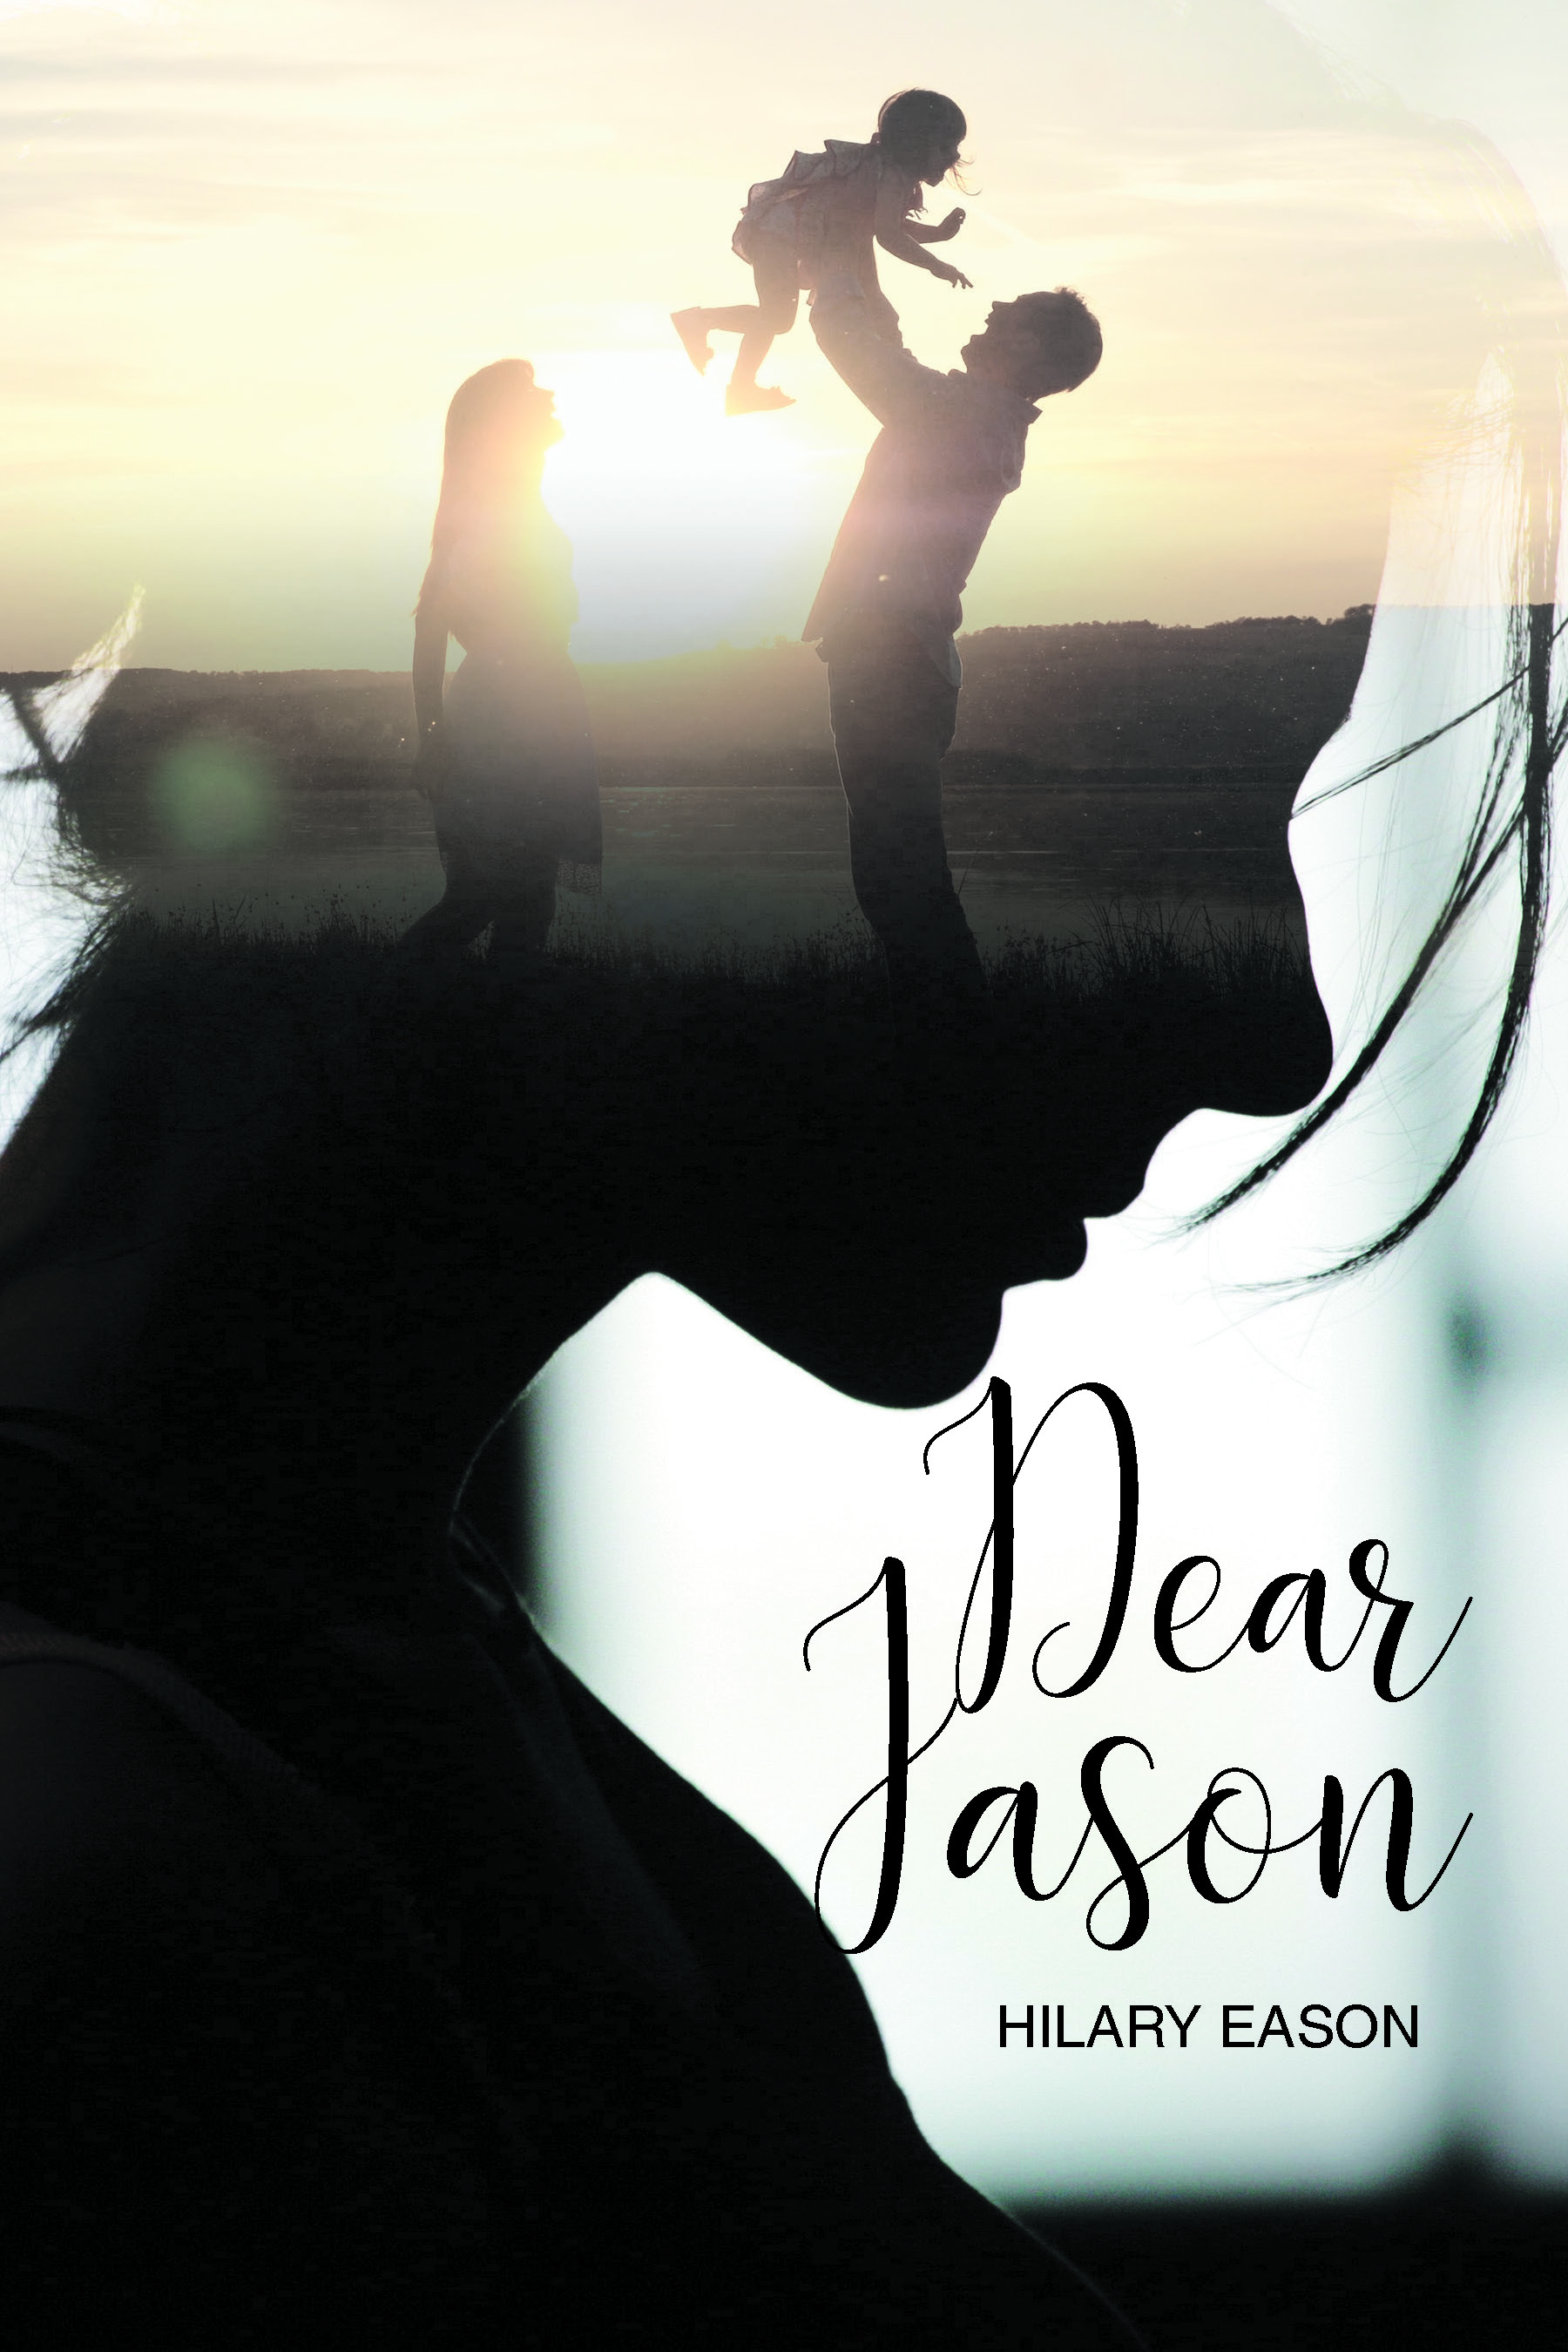 Author Hilary Tharp’s New Book, "Dear Jason," is a Touching and Potent Story About a Woman Learning to Move on After the Birth of Her Baby and the Loss of Her Husband